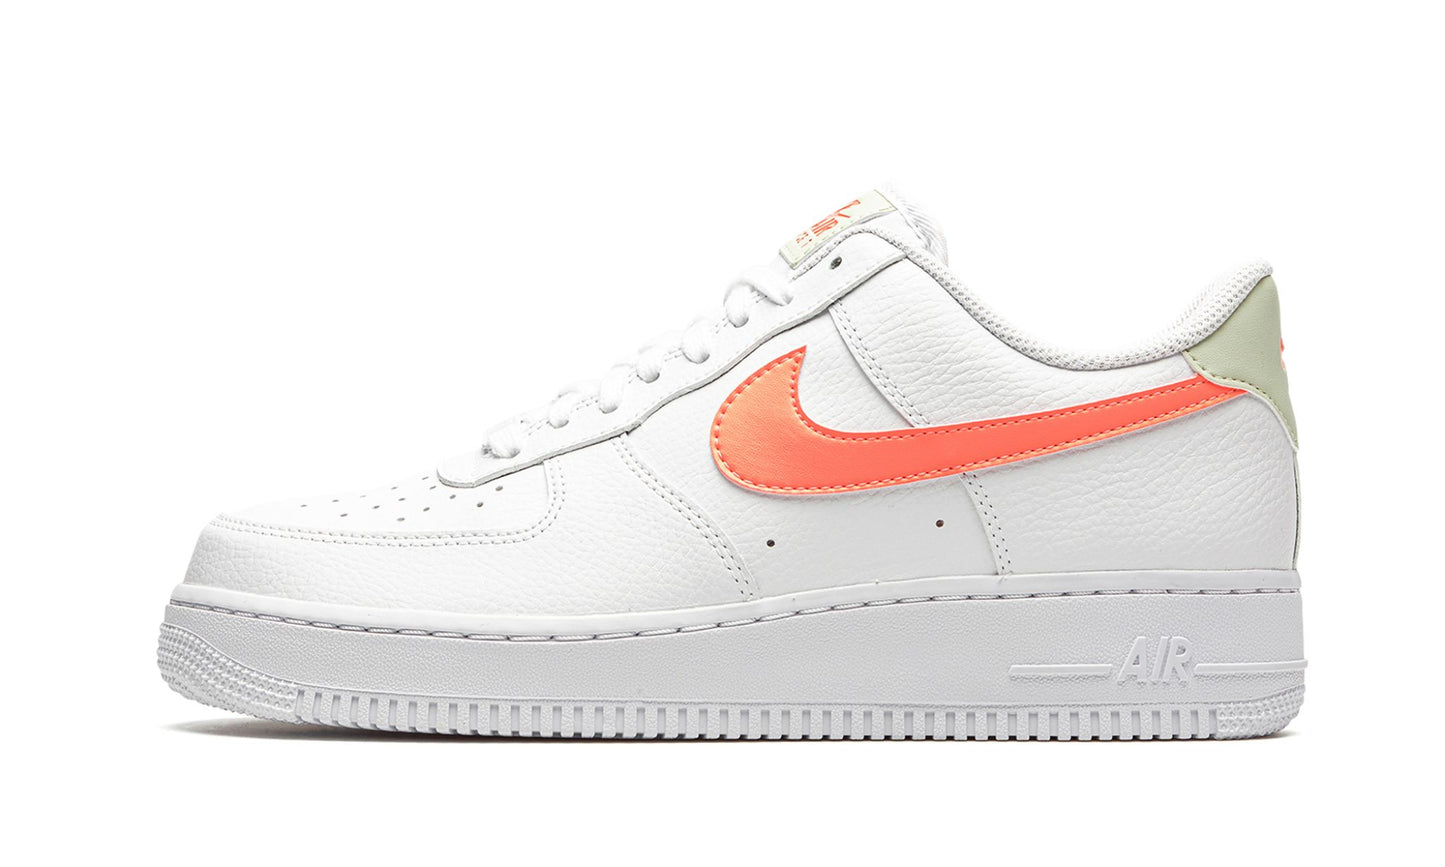 WMNS AIR FORCE 1 07 "ATOMIC PINK"